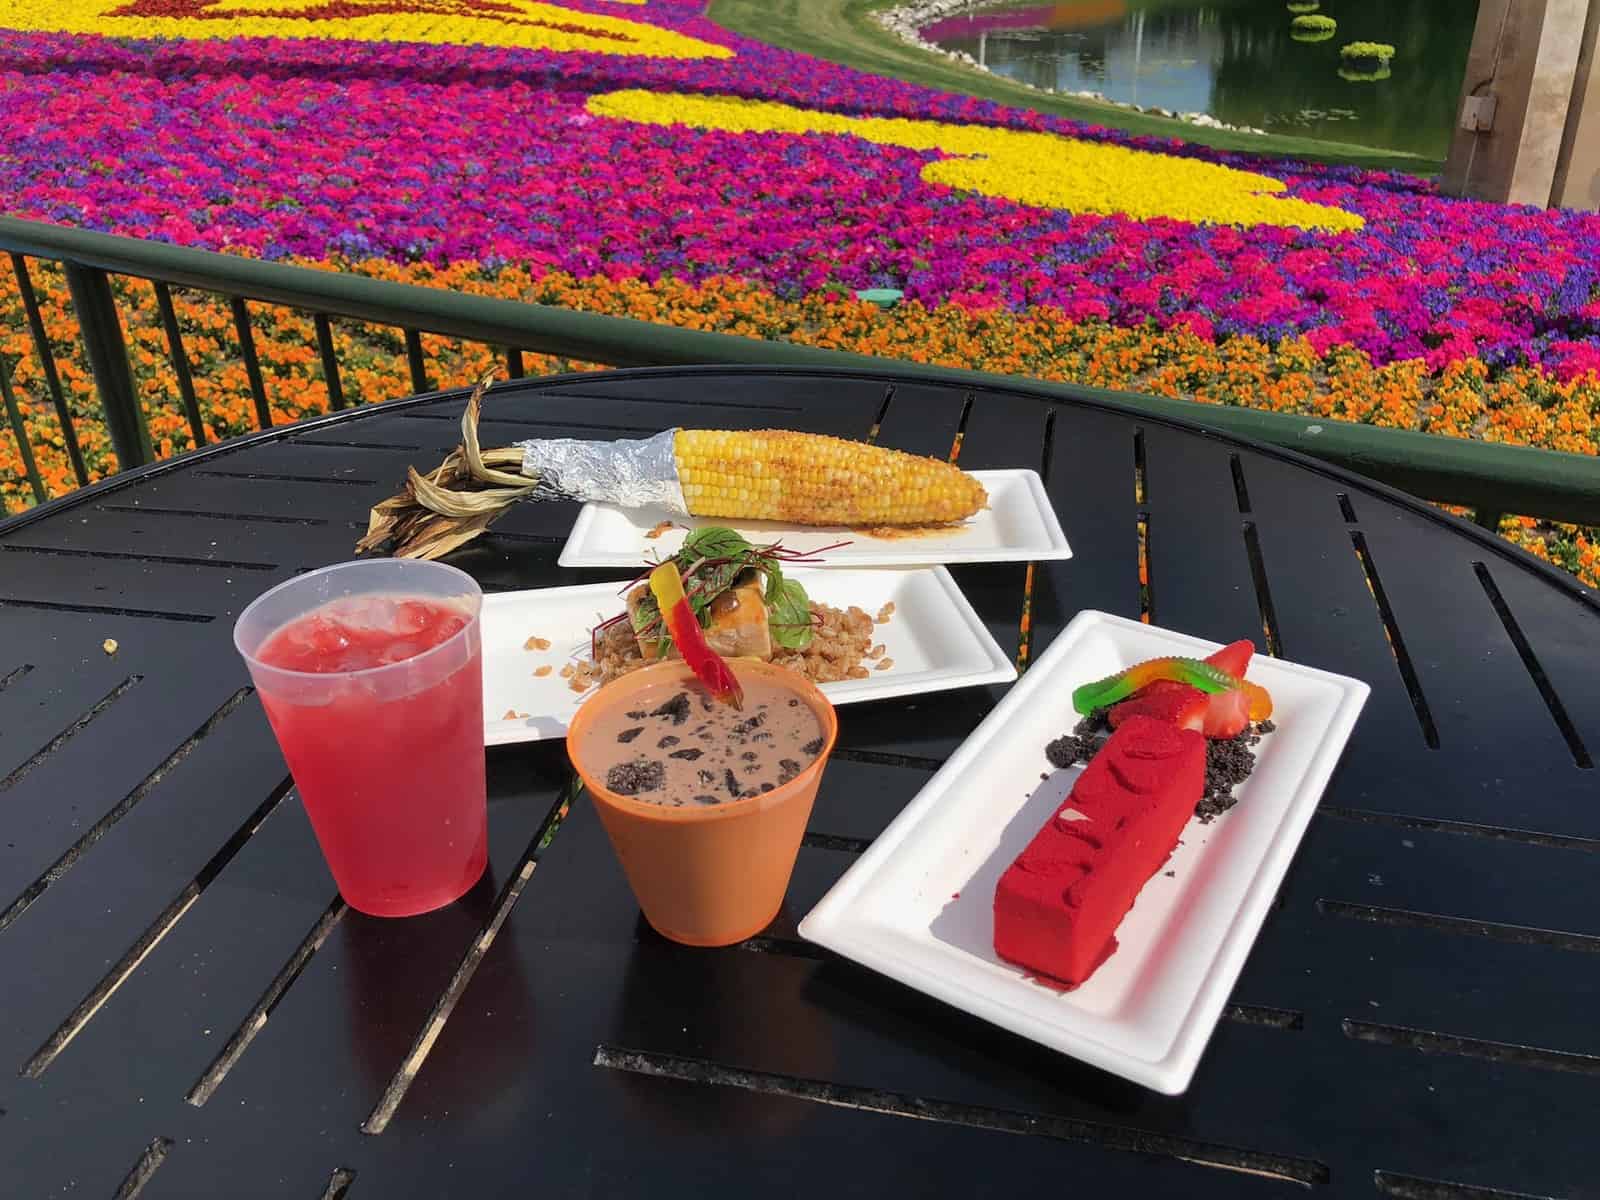 Popular Epcot Flower and Garden Items That Aren’t Really That Good